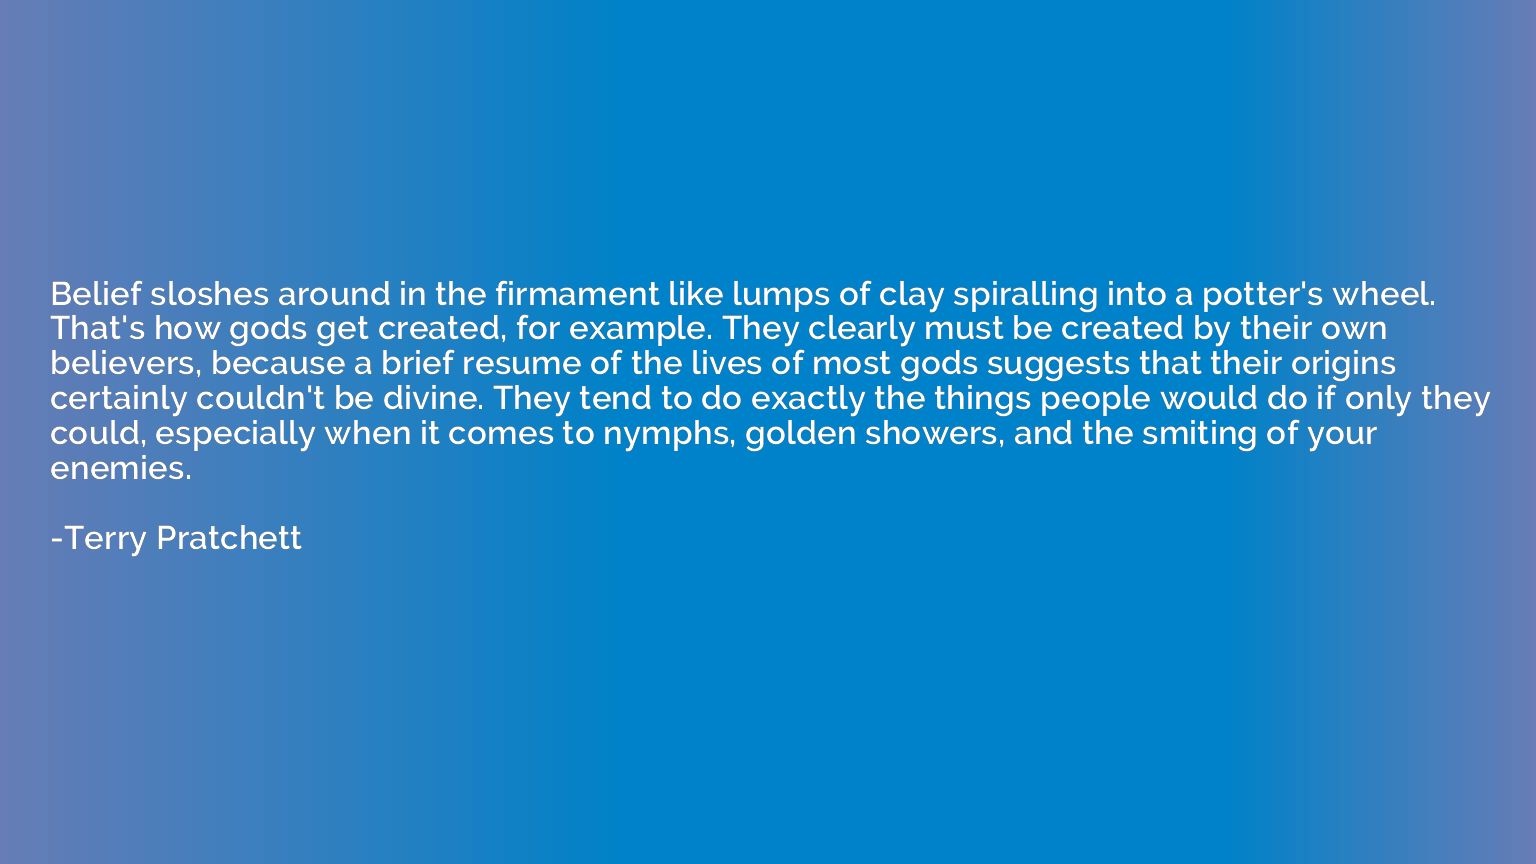 Belief sloshes around in the firmament like lumps of clay sp